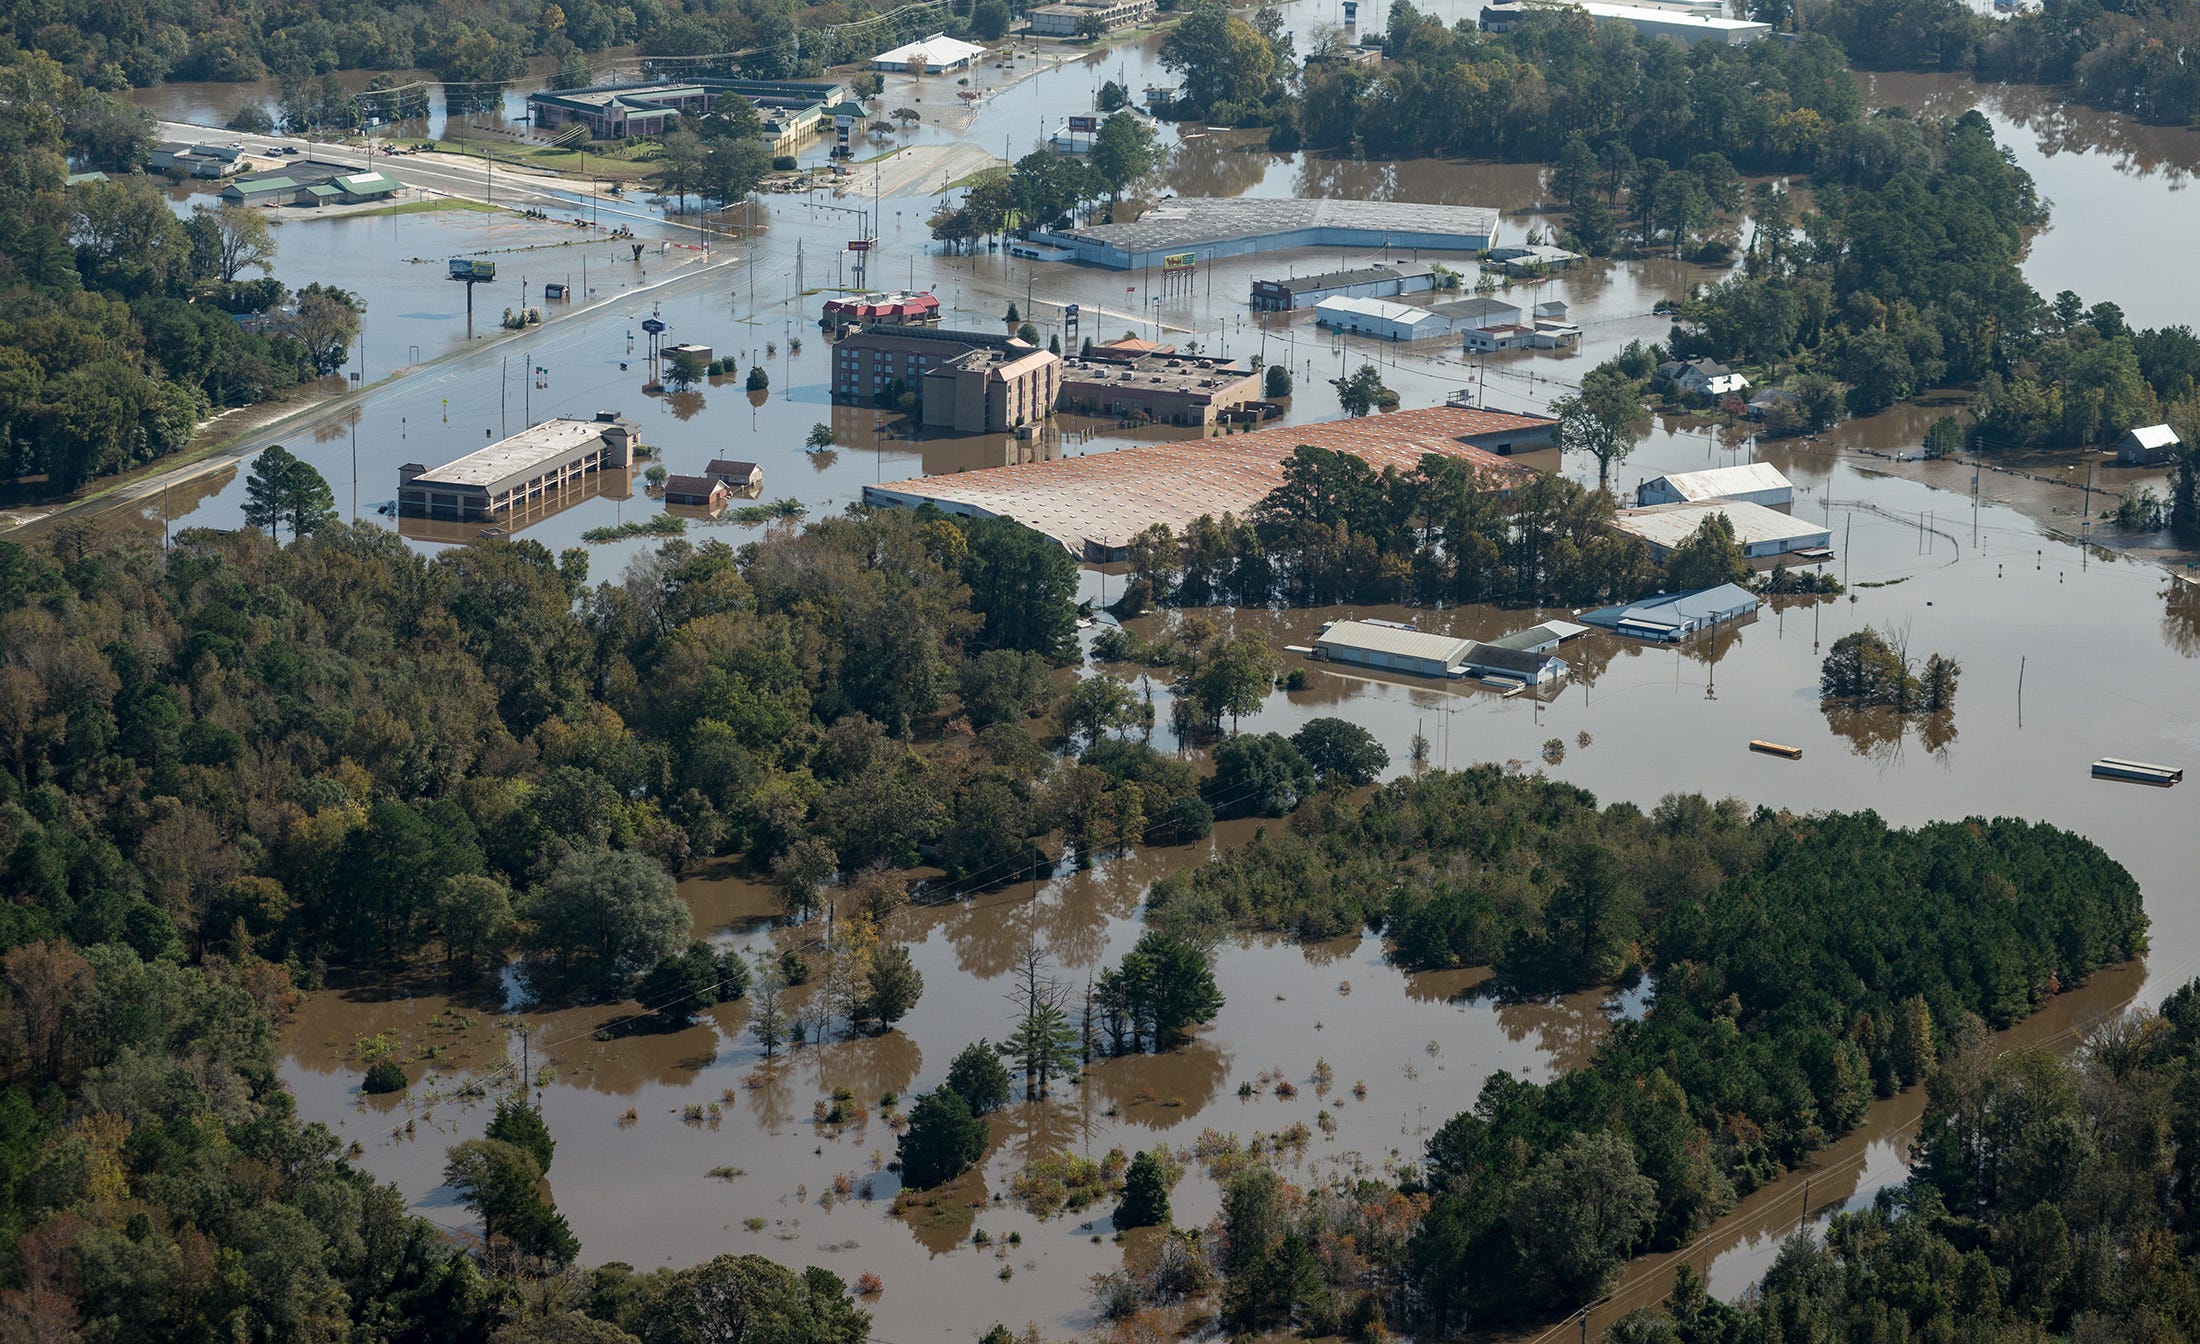 Floodwaters from Hurricane Matthew inundate Kinston, N.C., on Oct. 16, 2016. Many areas flooded by Matthew would again be flooded by Hurricane Florence two years later.